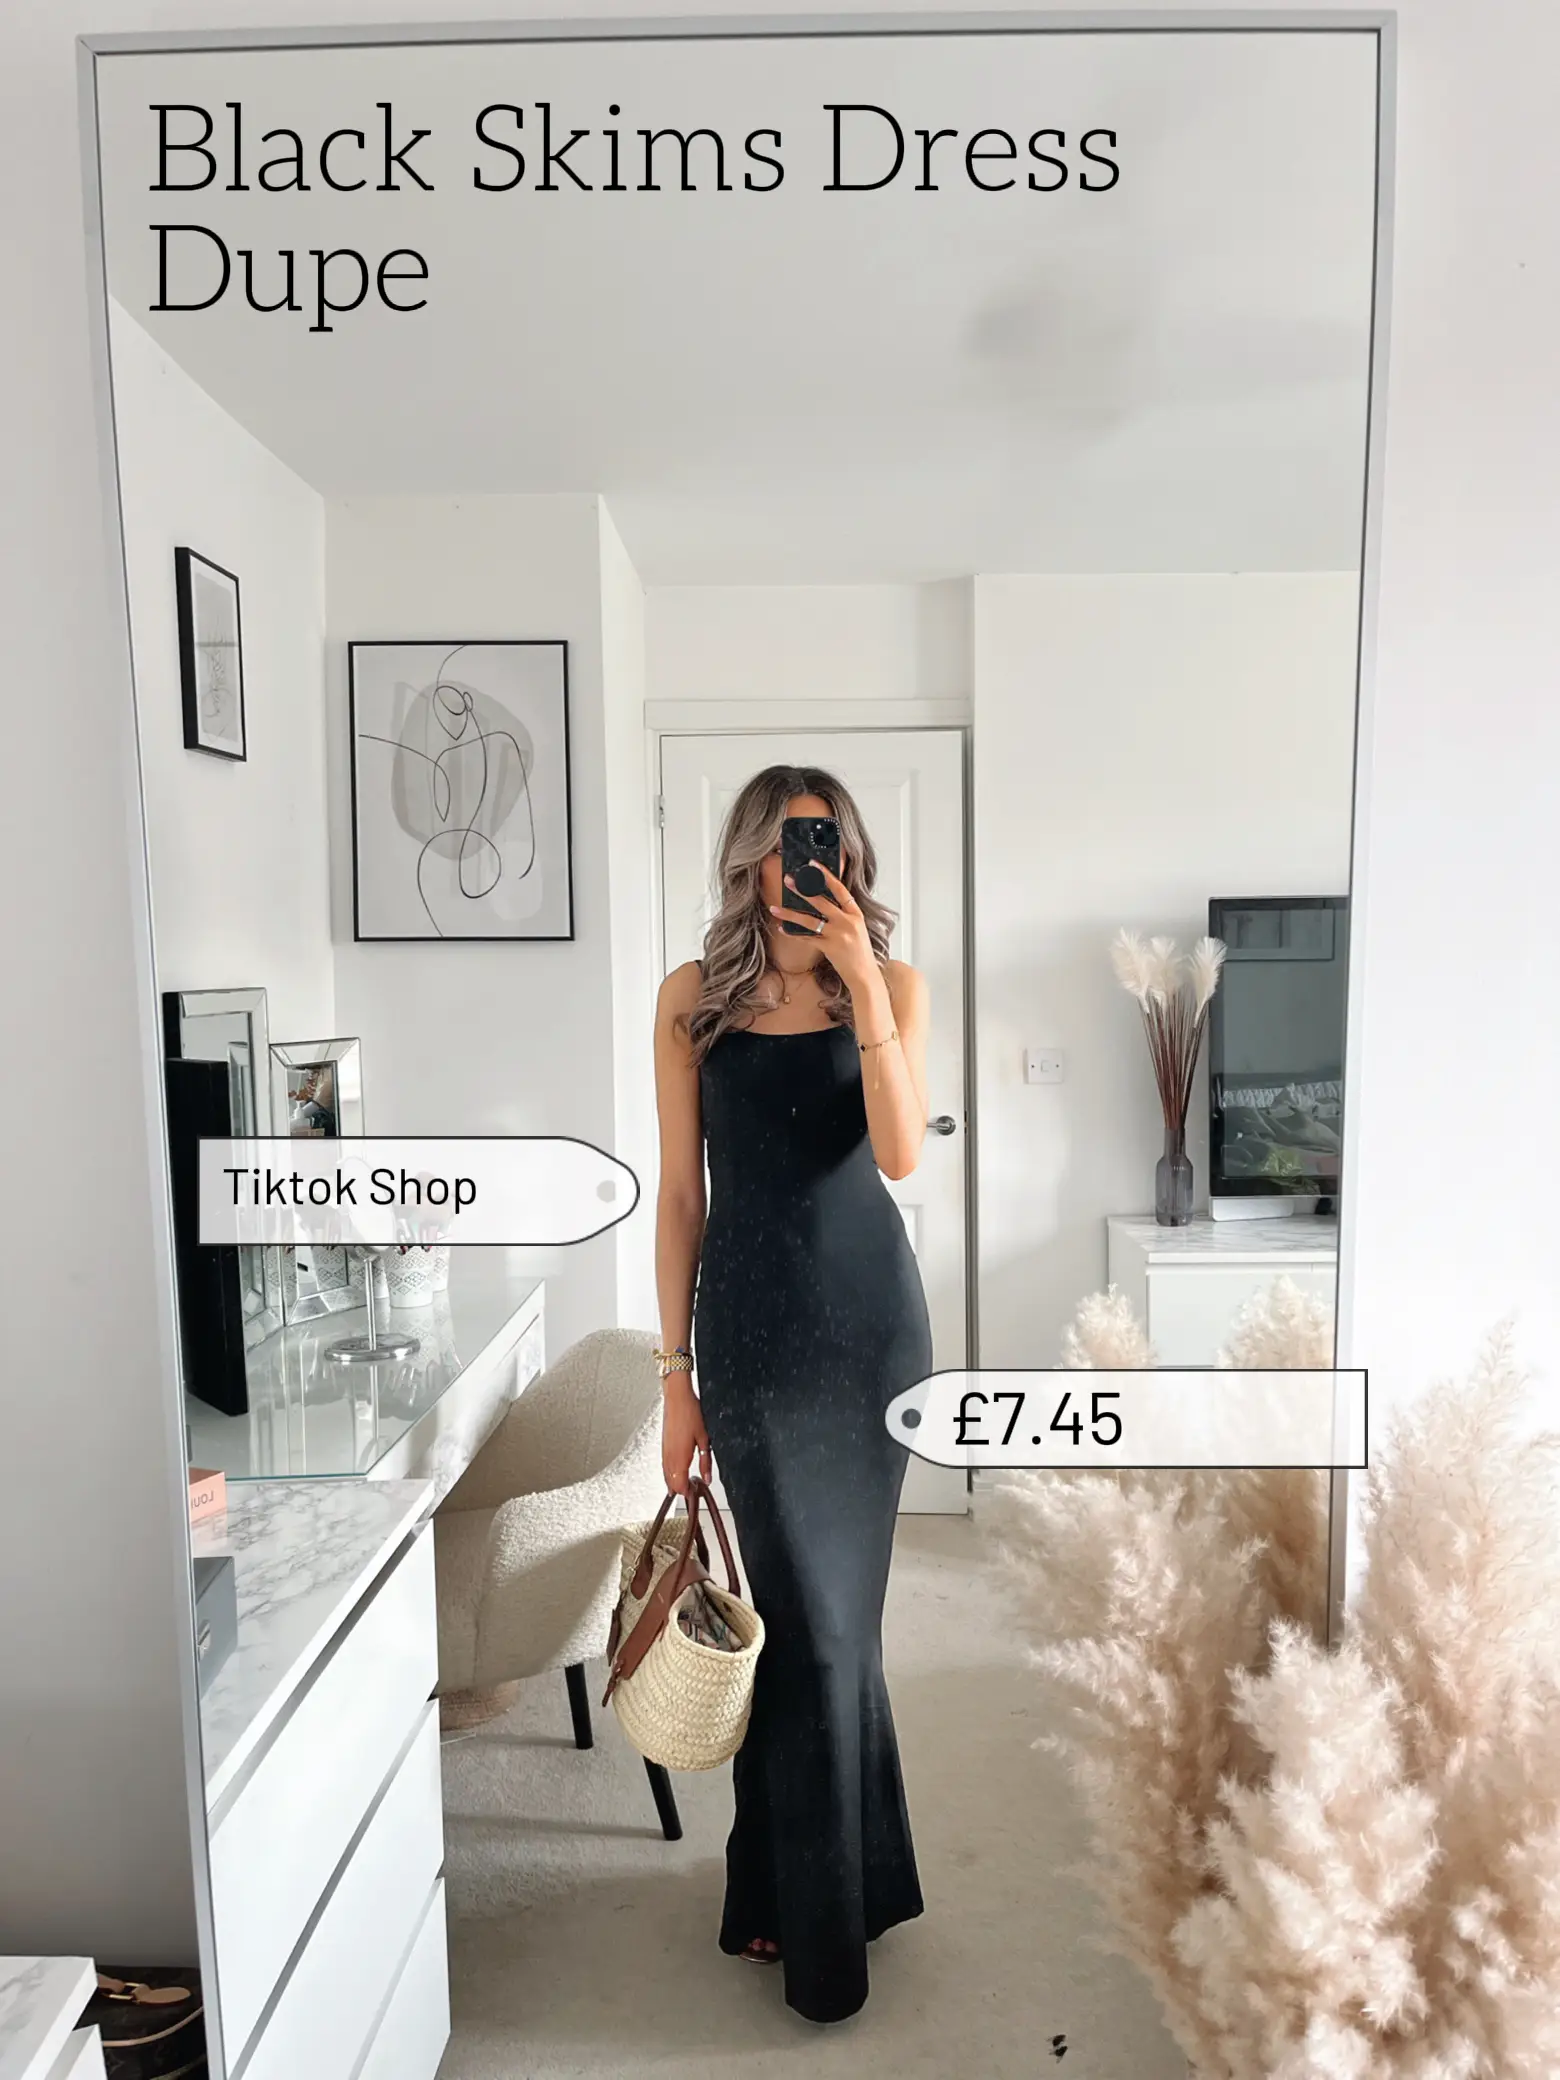 These Skim Dresses Dupes Are So Good, You'll Do a Double-Take